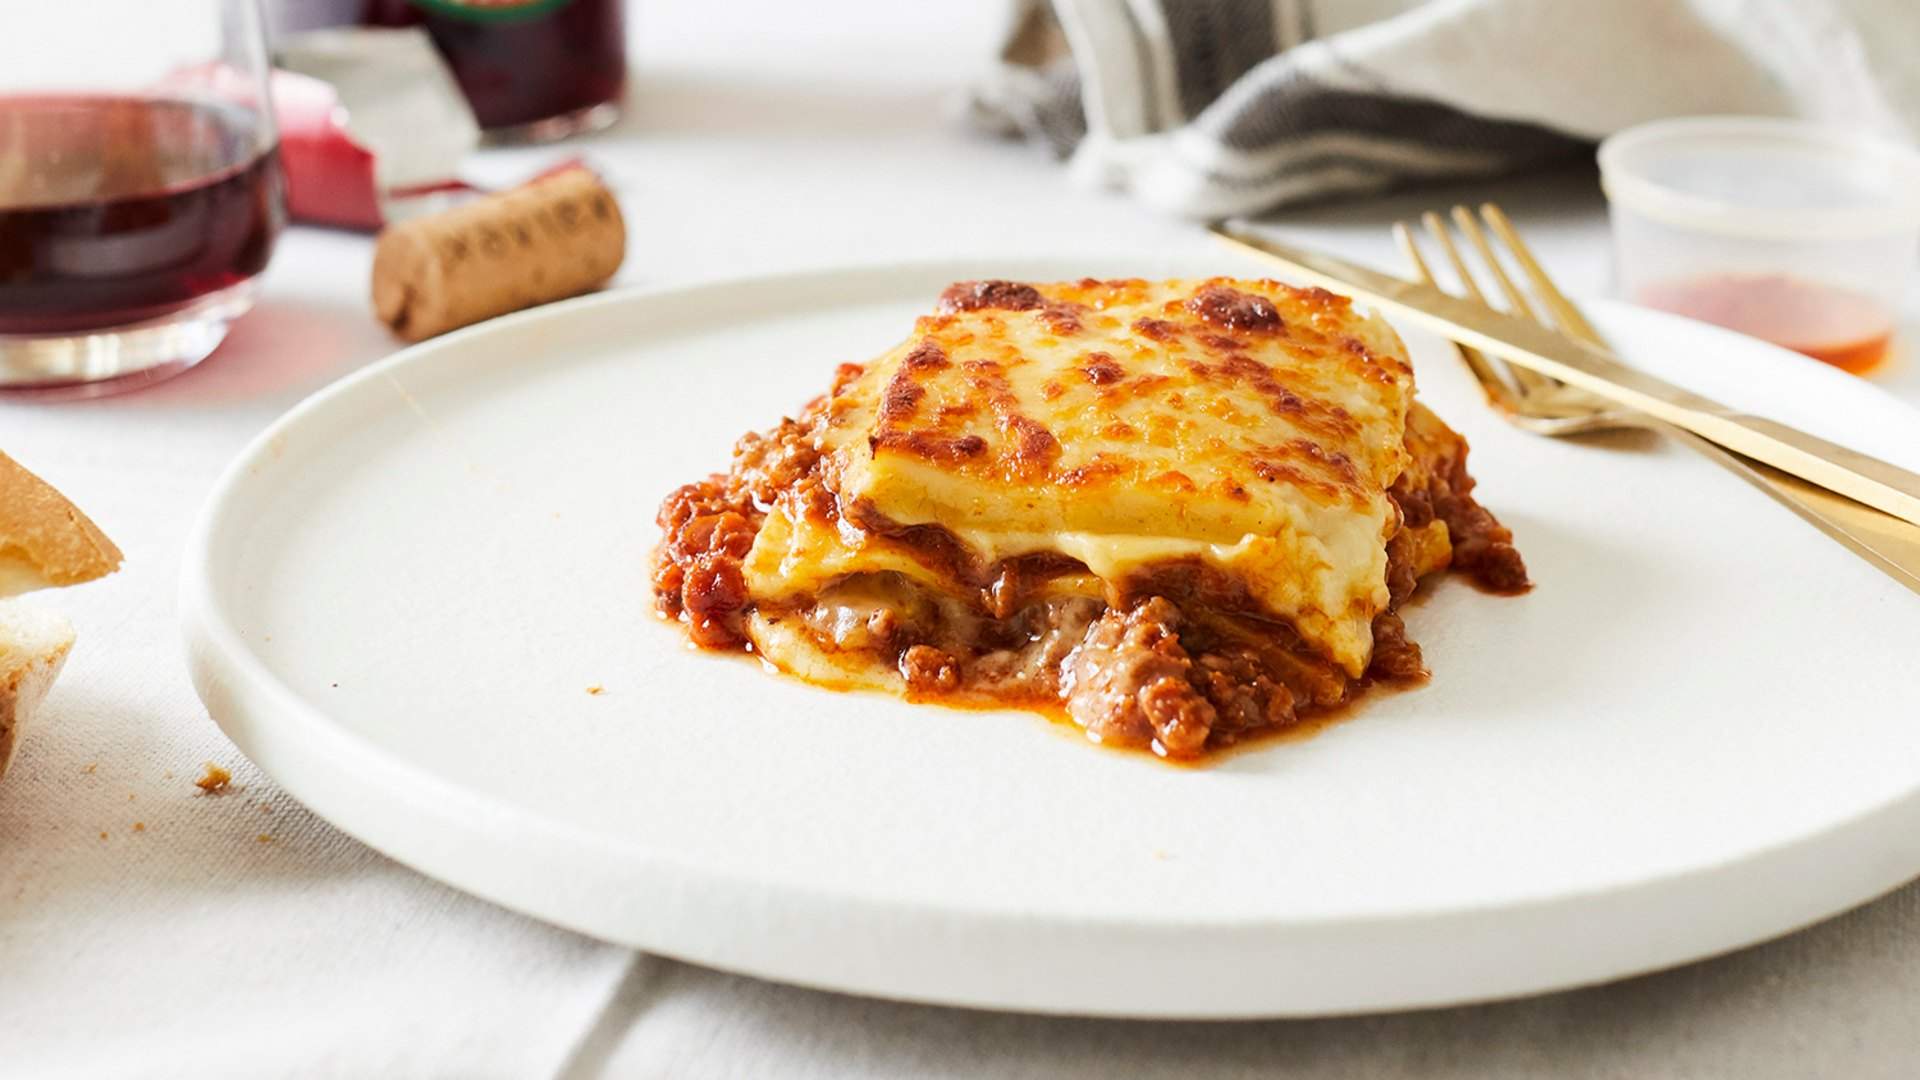 1800-Lasagne Is Opening Its First Bricks-and-Mortar Bar and Eatery in Thornbury